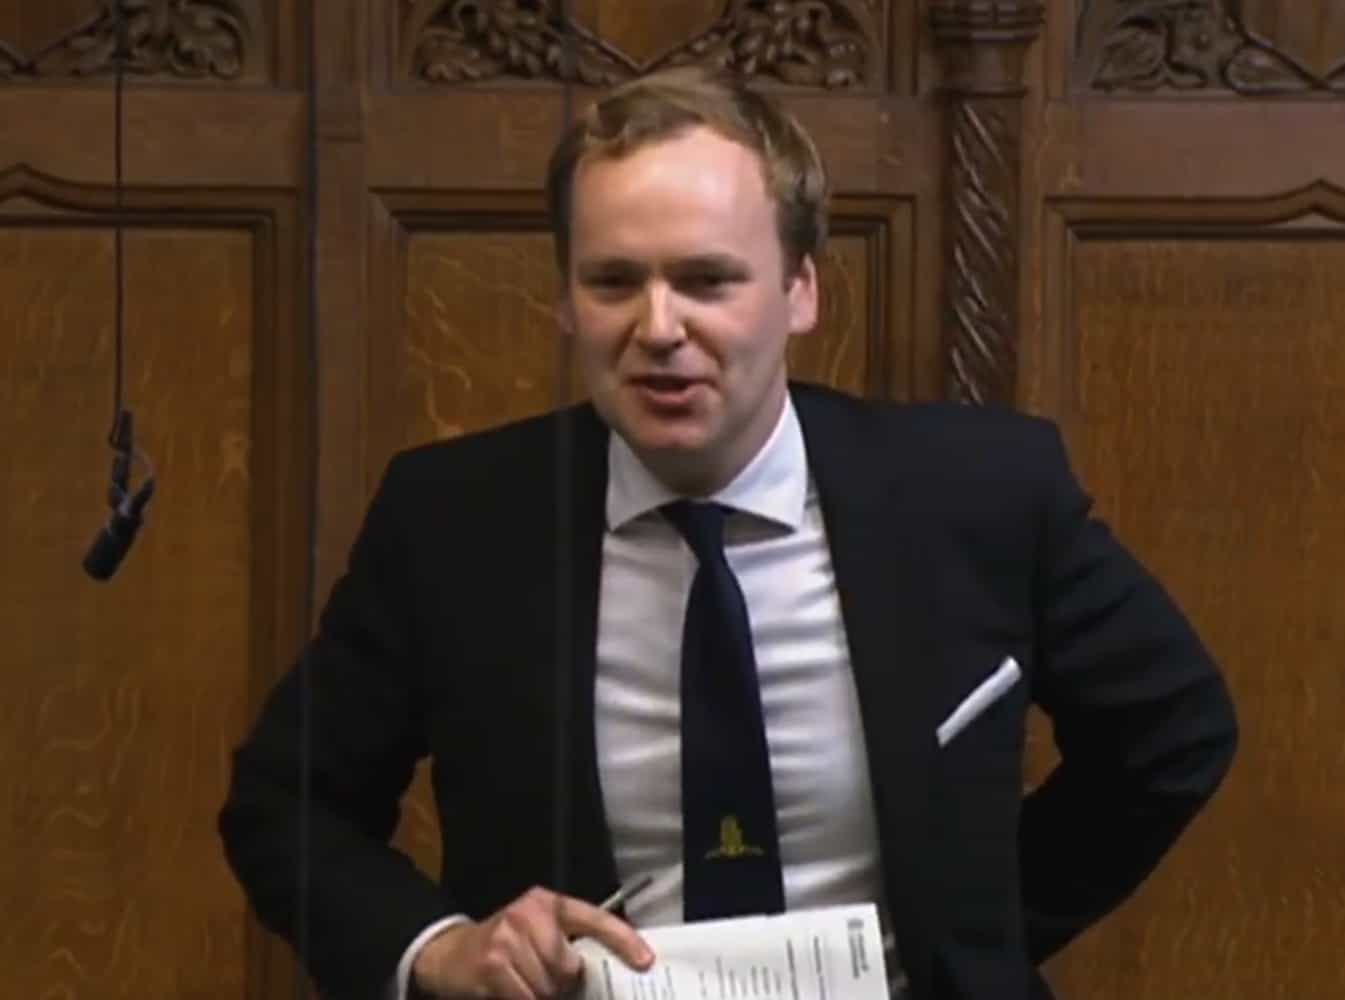 Tory MP involved in sexting scam ‘resigns as vice-chairman of 1922 Committee’